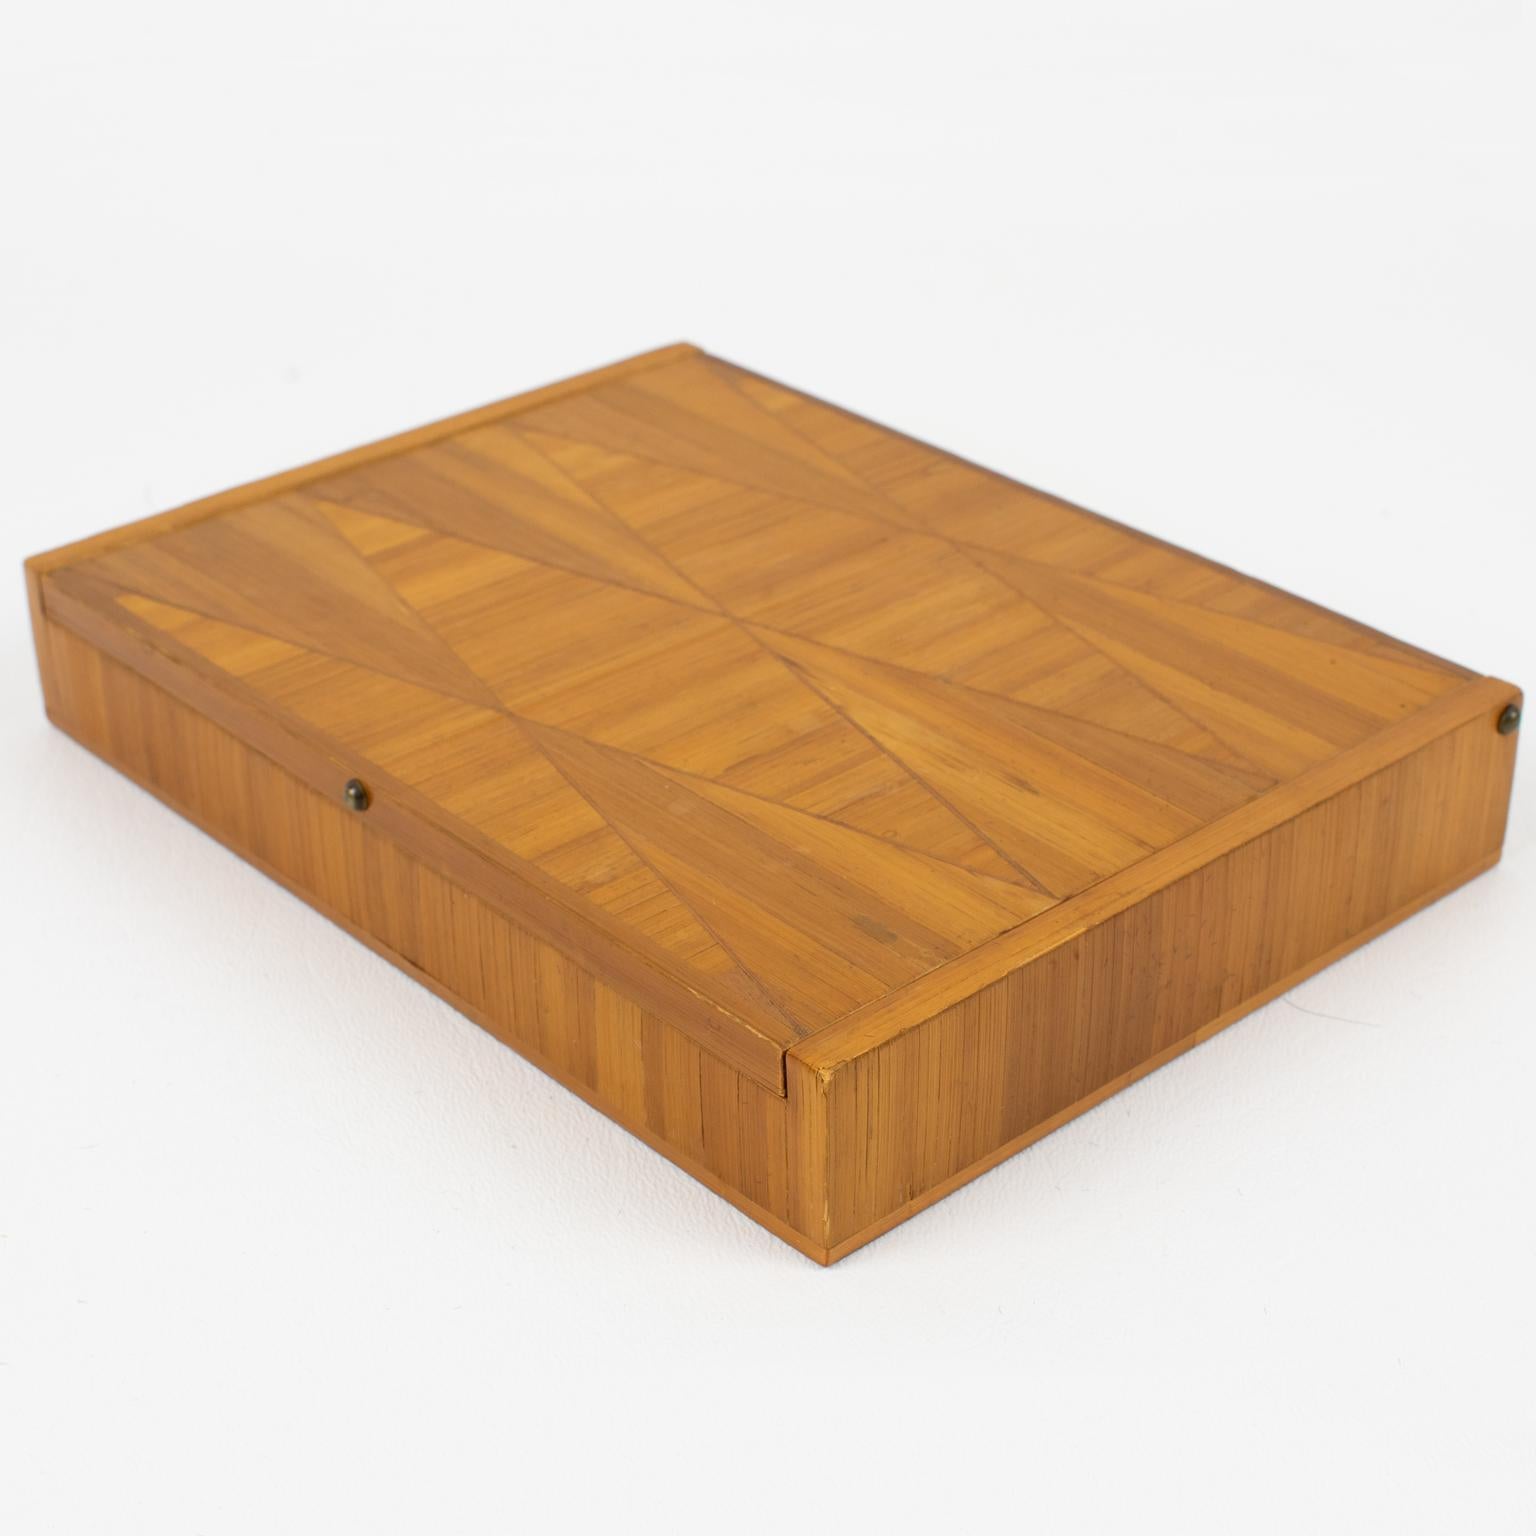 Decorative Straw Marquetry Box, France 1930s attributed to Jean Michel Frank For Sale 3